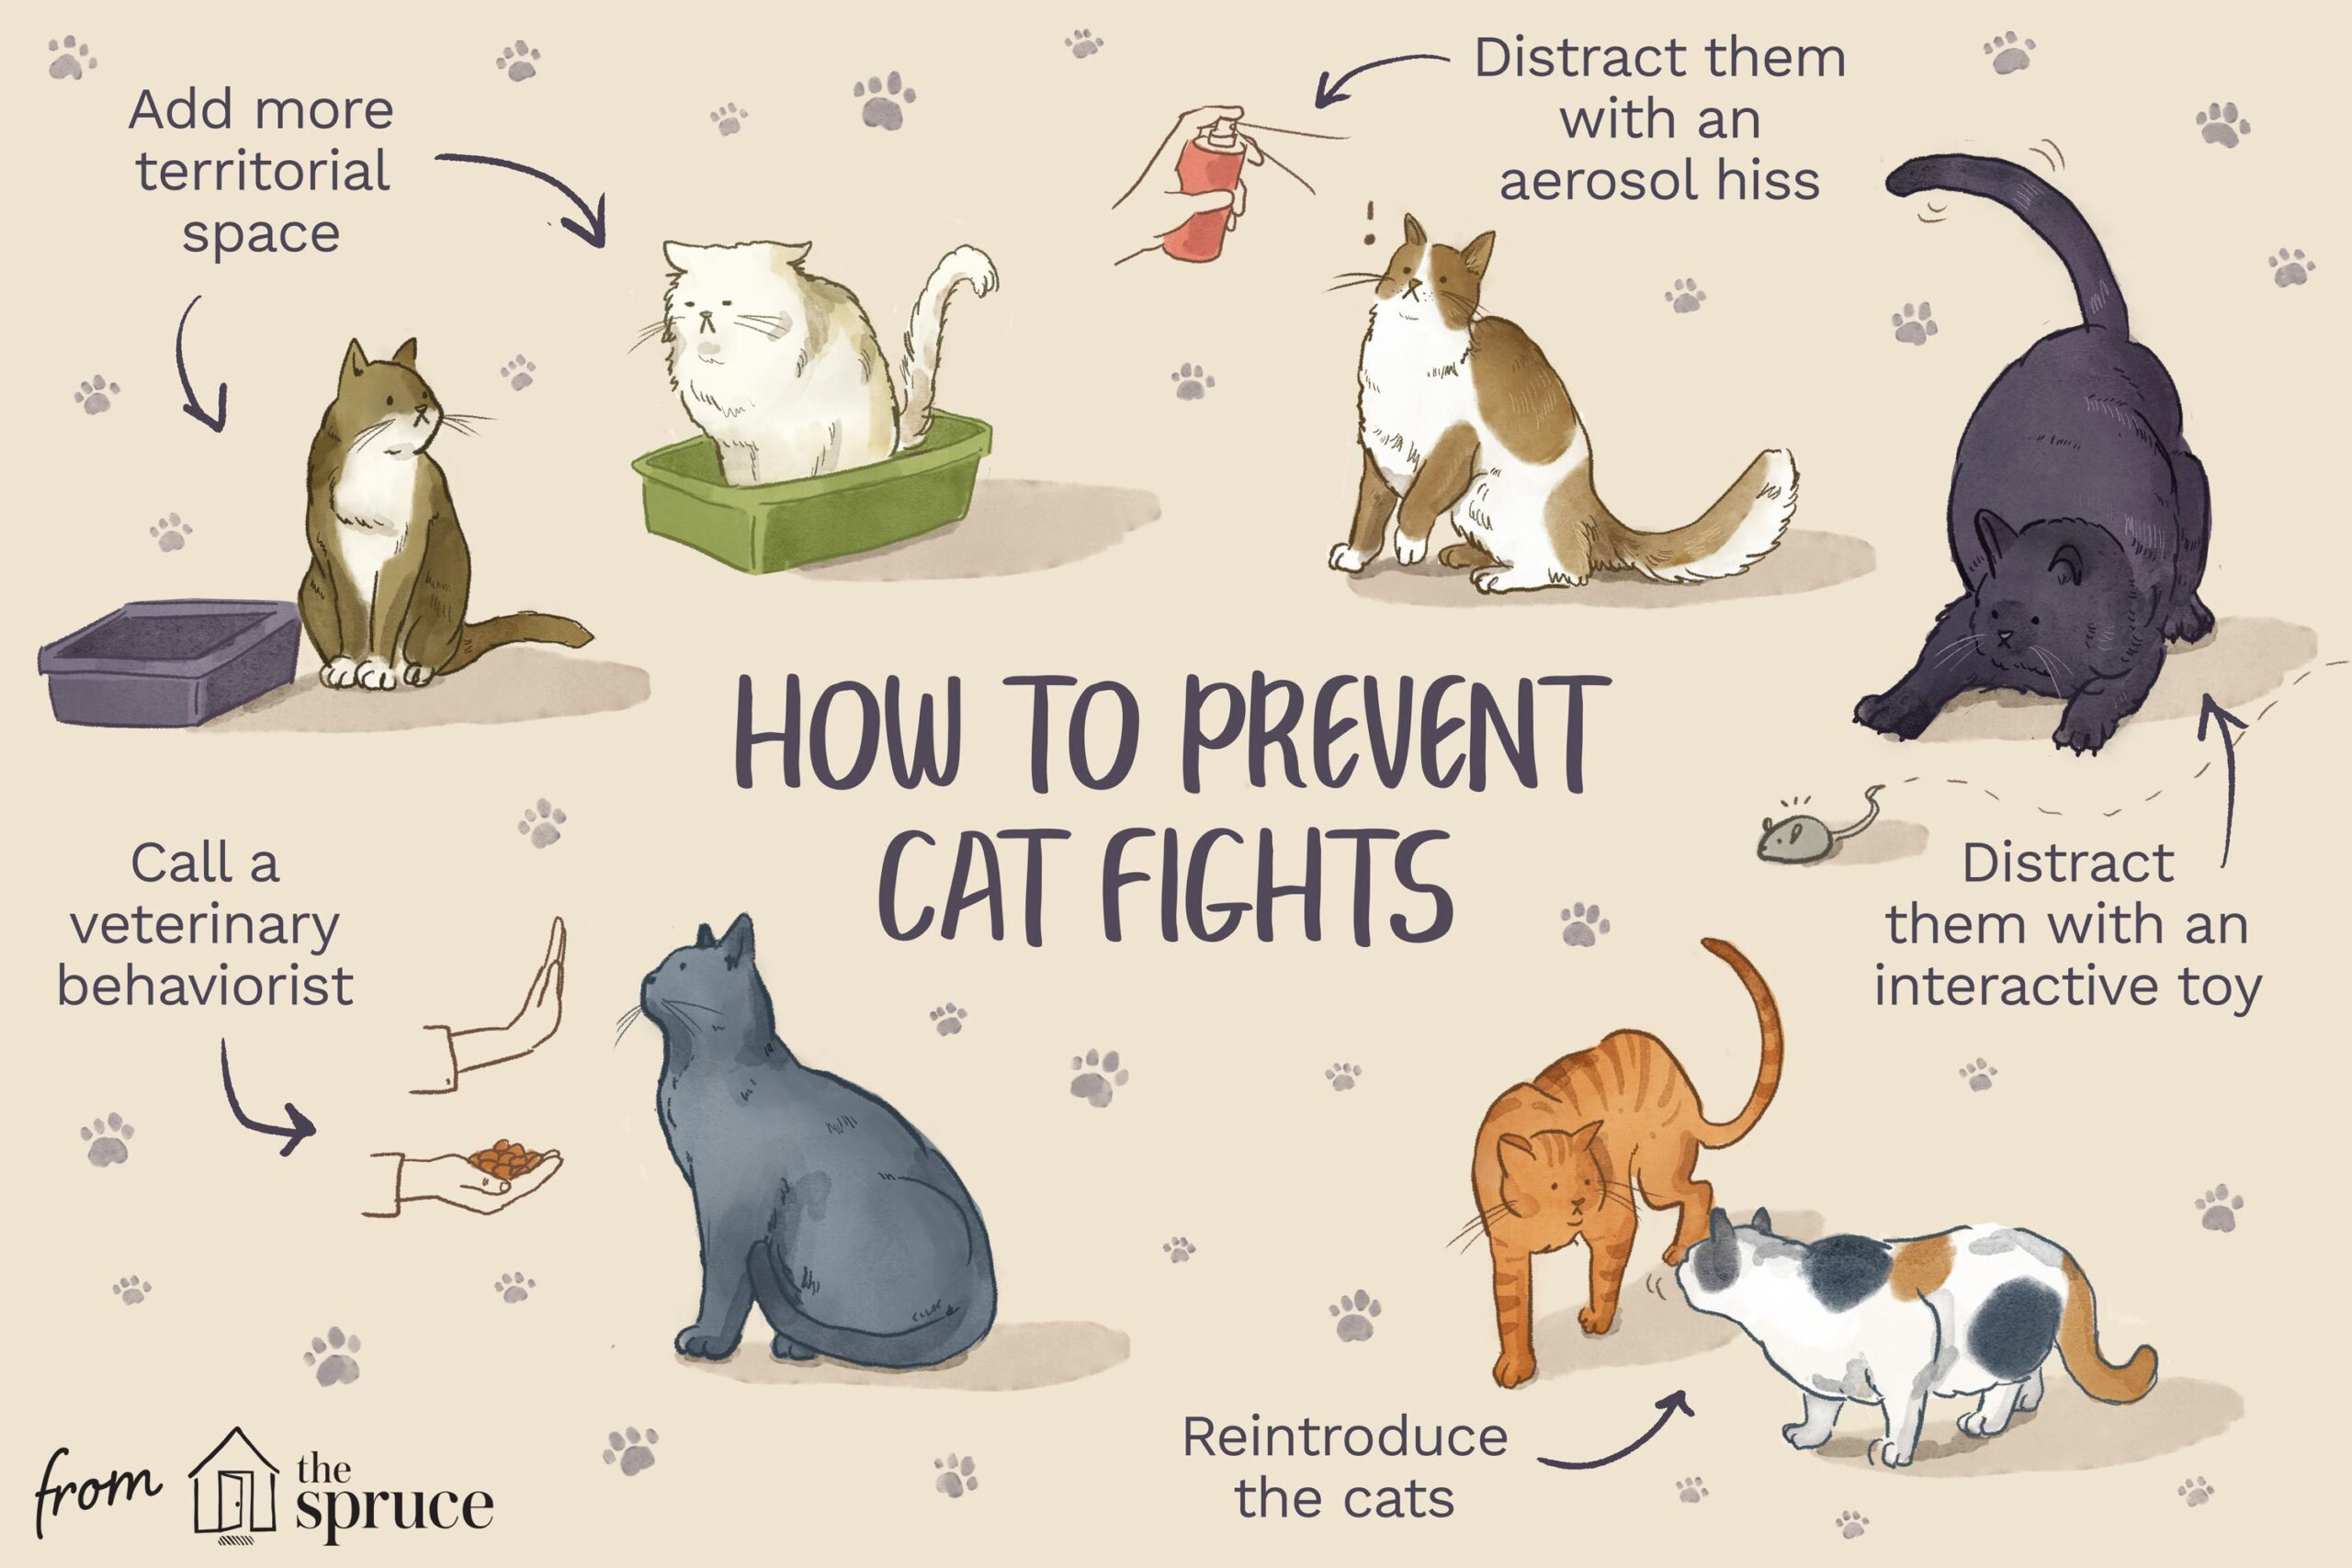 How to Safely Stop a Cat Fight